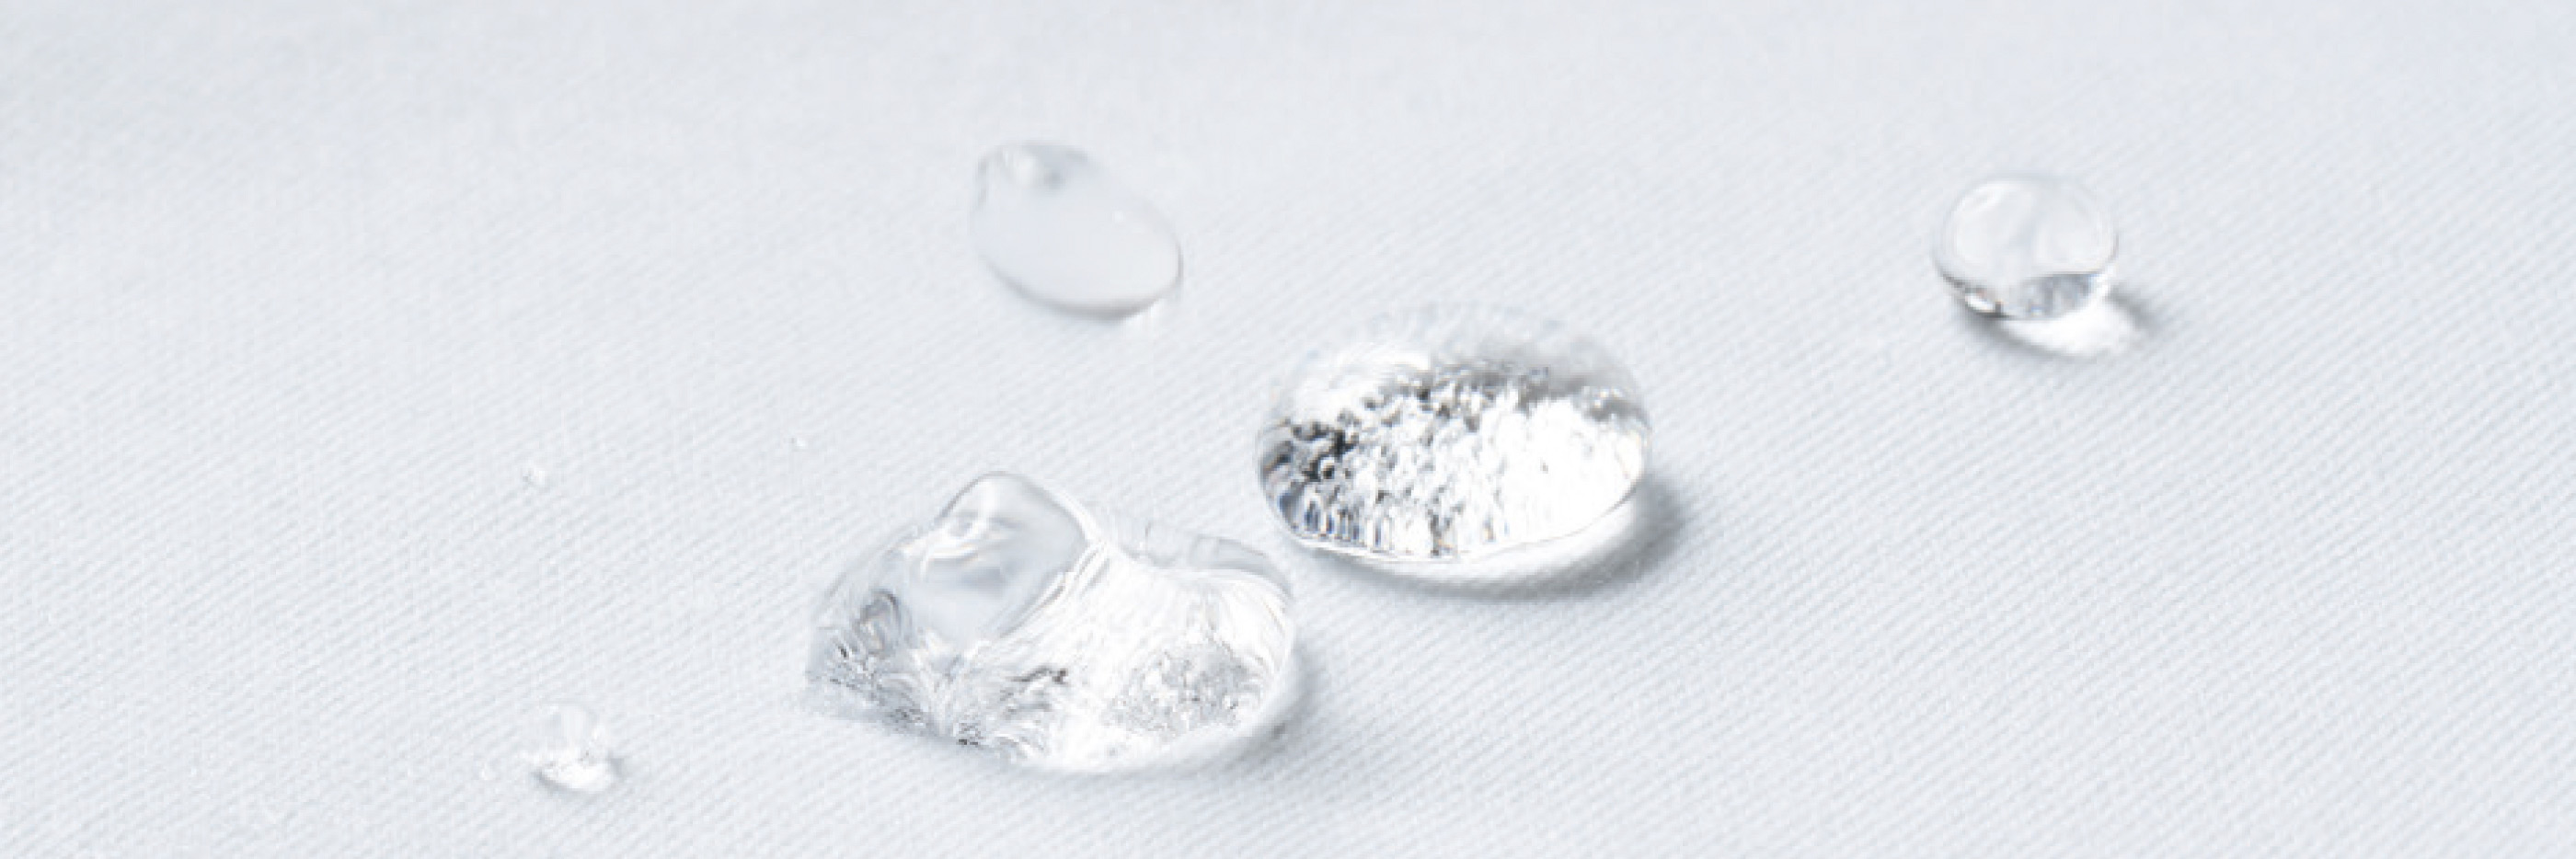 Water droplets collect on white fabric with hydrophobic properties | mey®